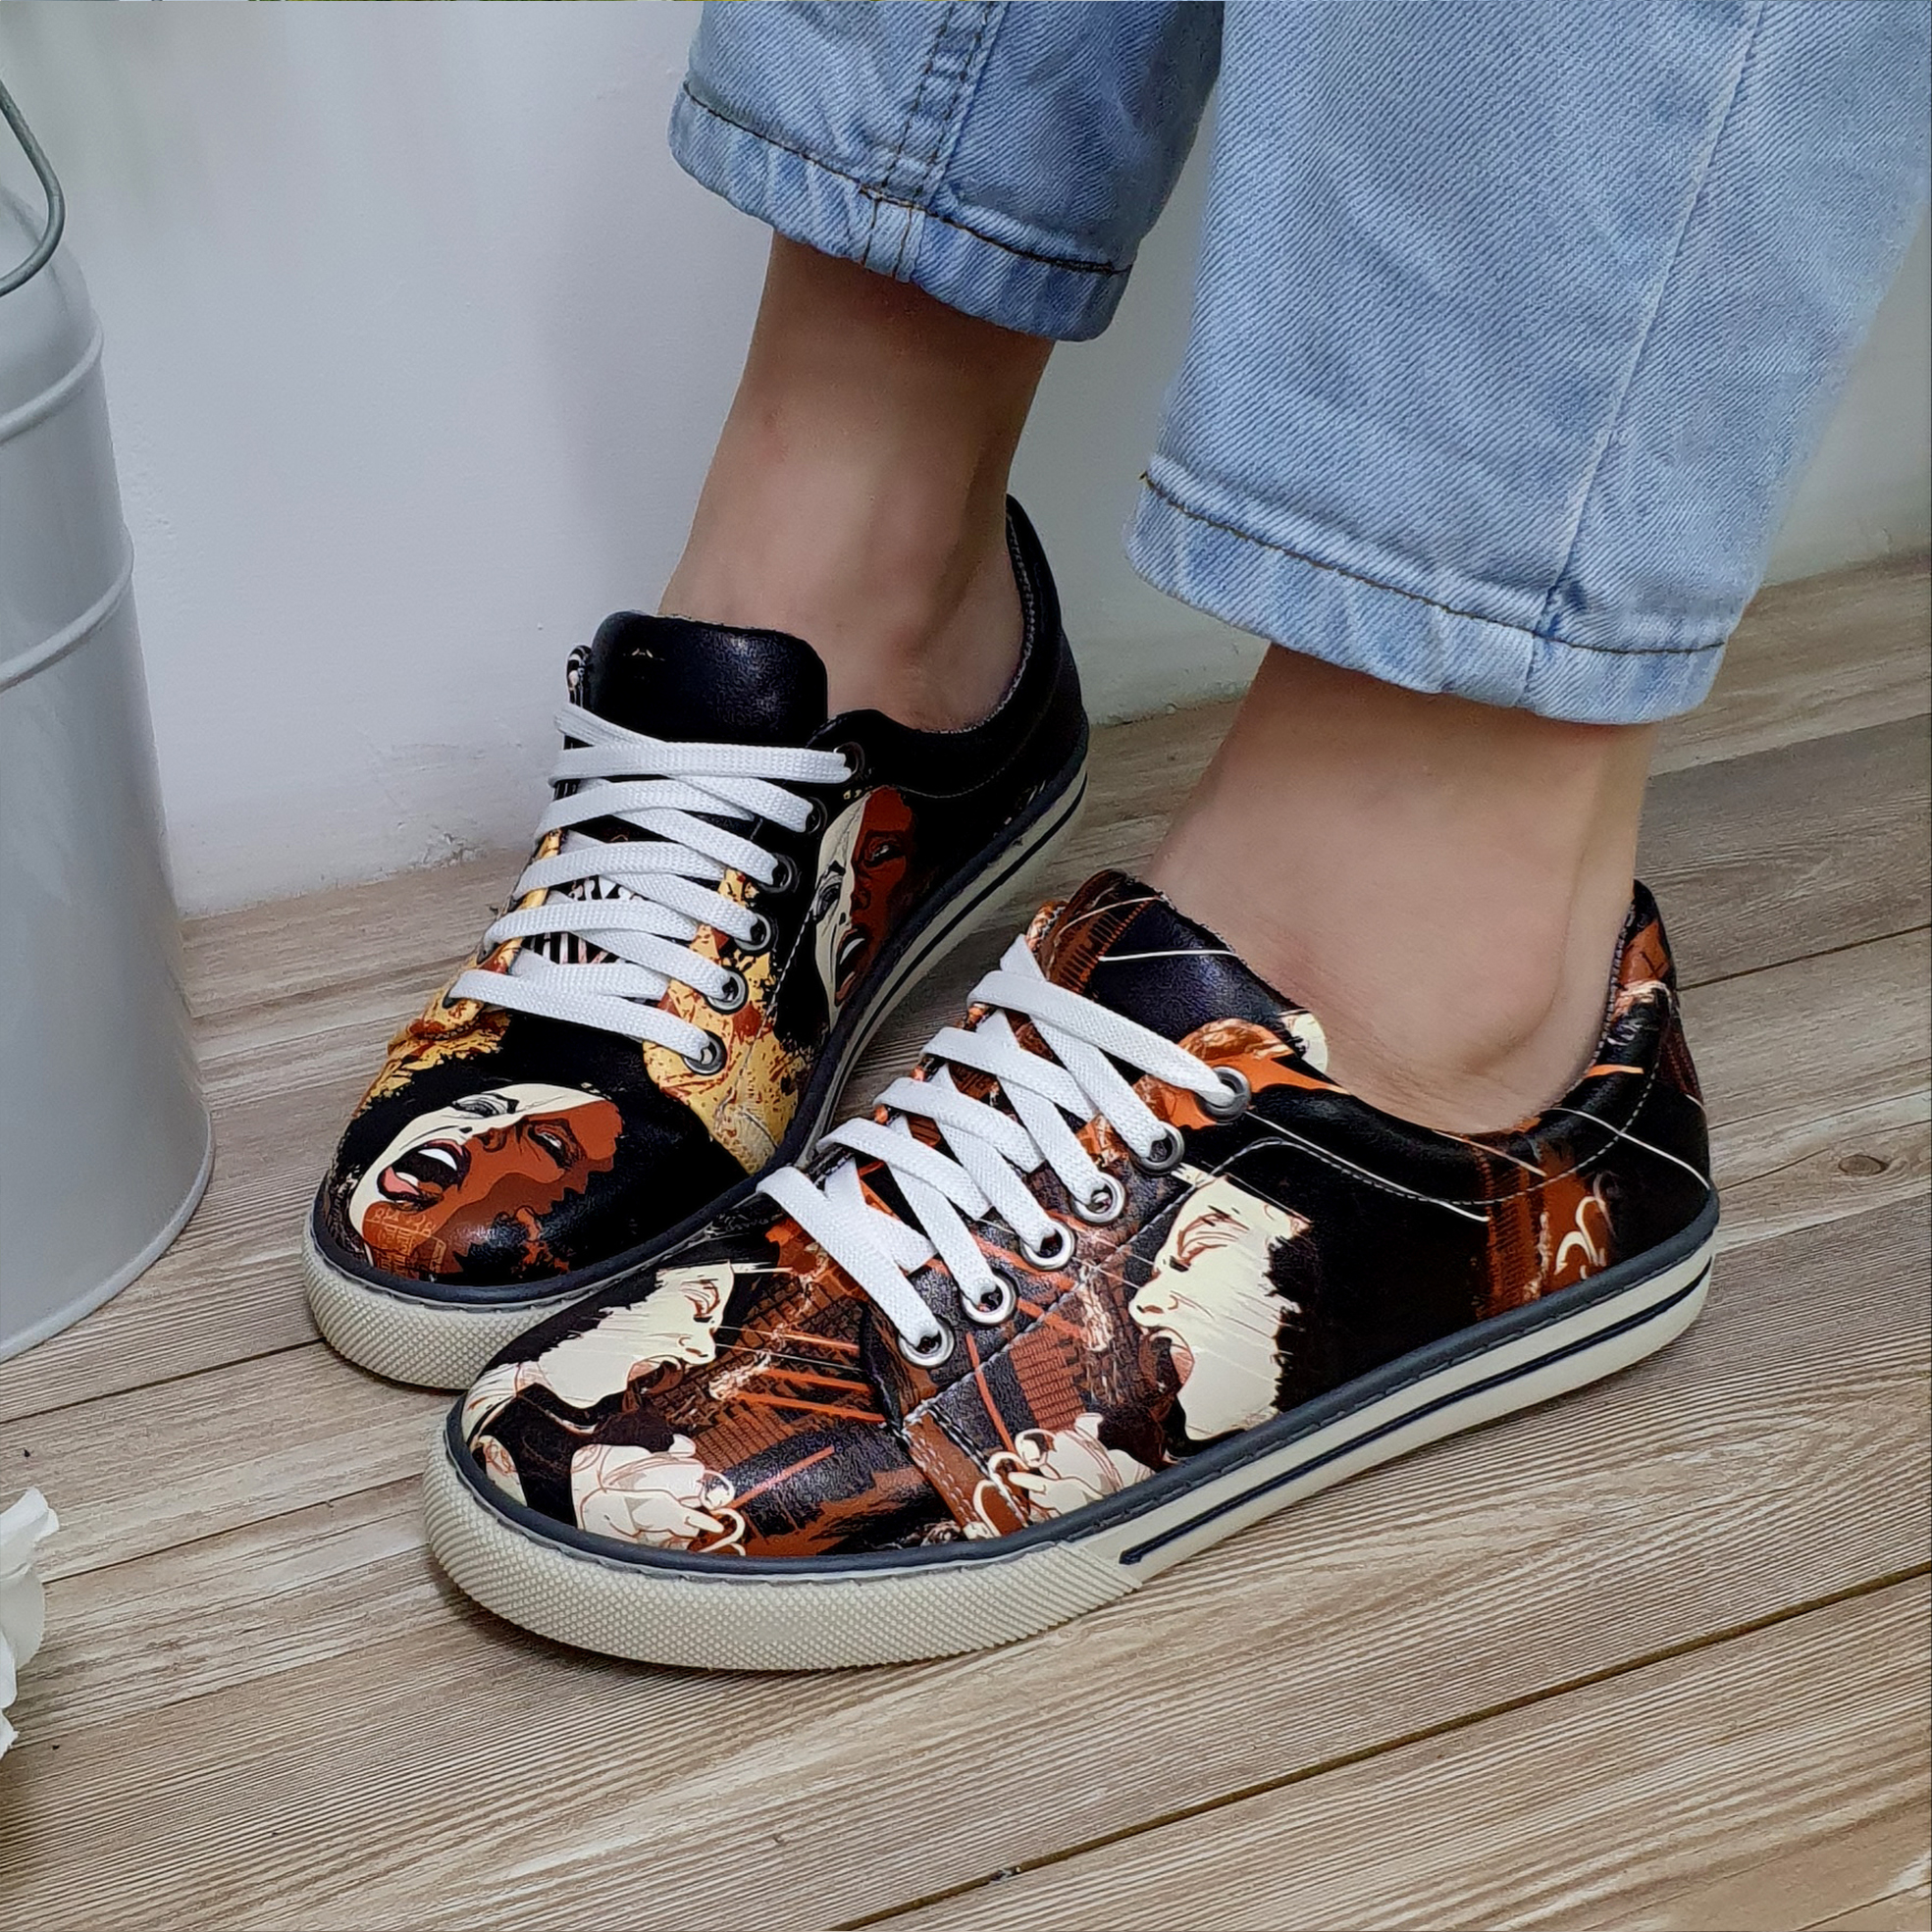 VOICE OF THE JAZZ PATTERN SPECIAL DESIGN WOMEN'S SNEAKERS